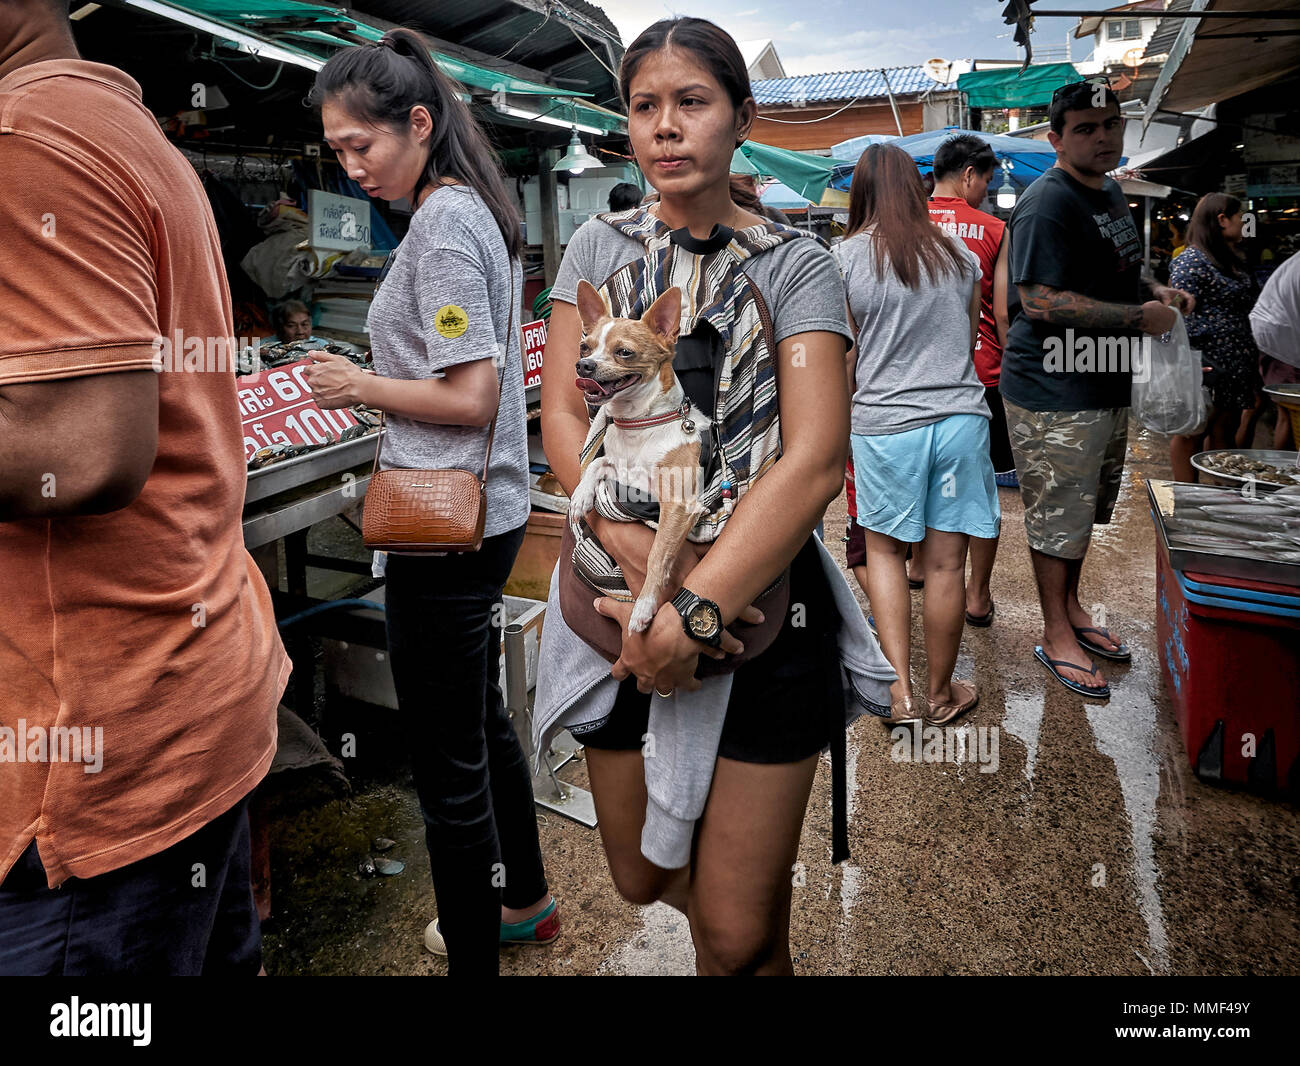 Woman carrying Dog. pet Chihuahua carried by owner through a street market. Thailand Southeast Asia Stock Photo